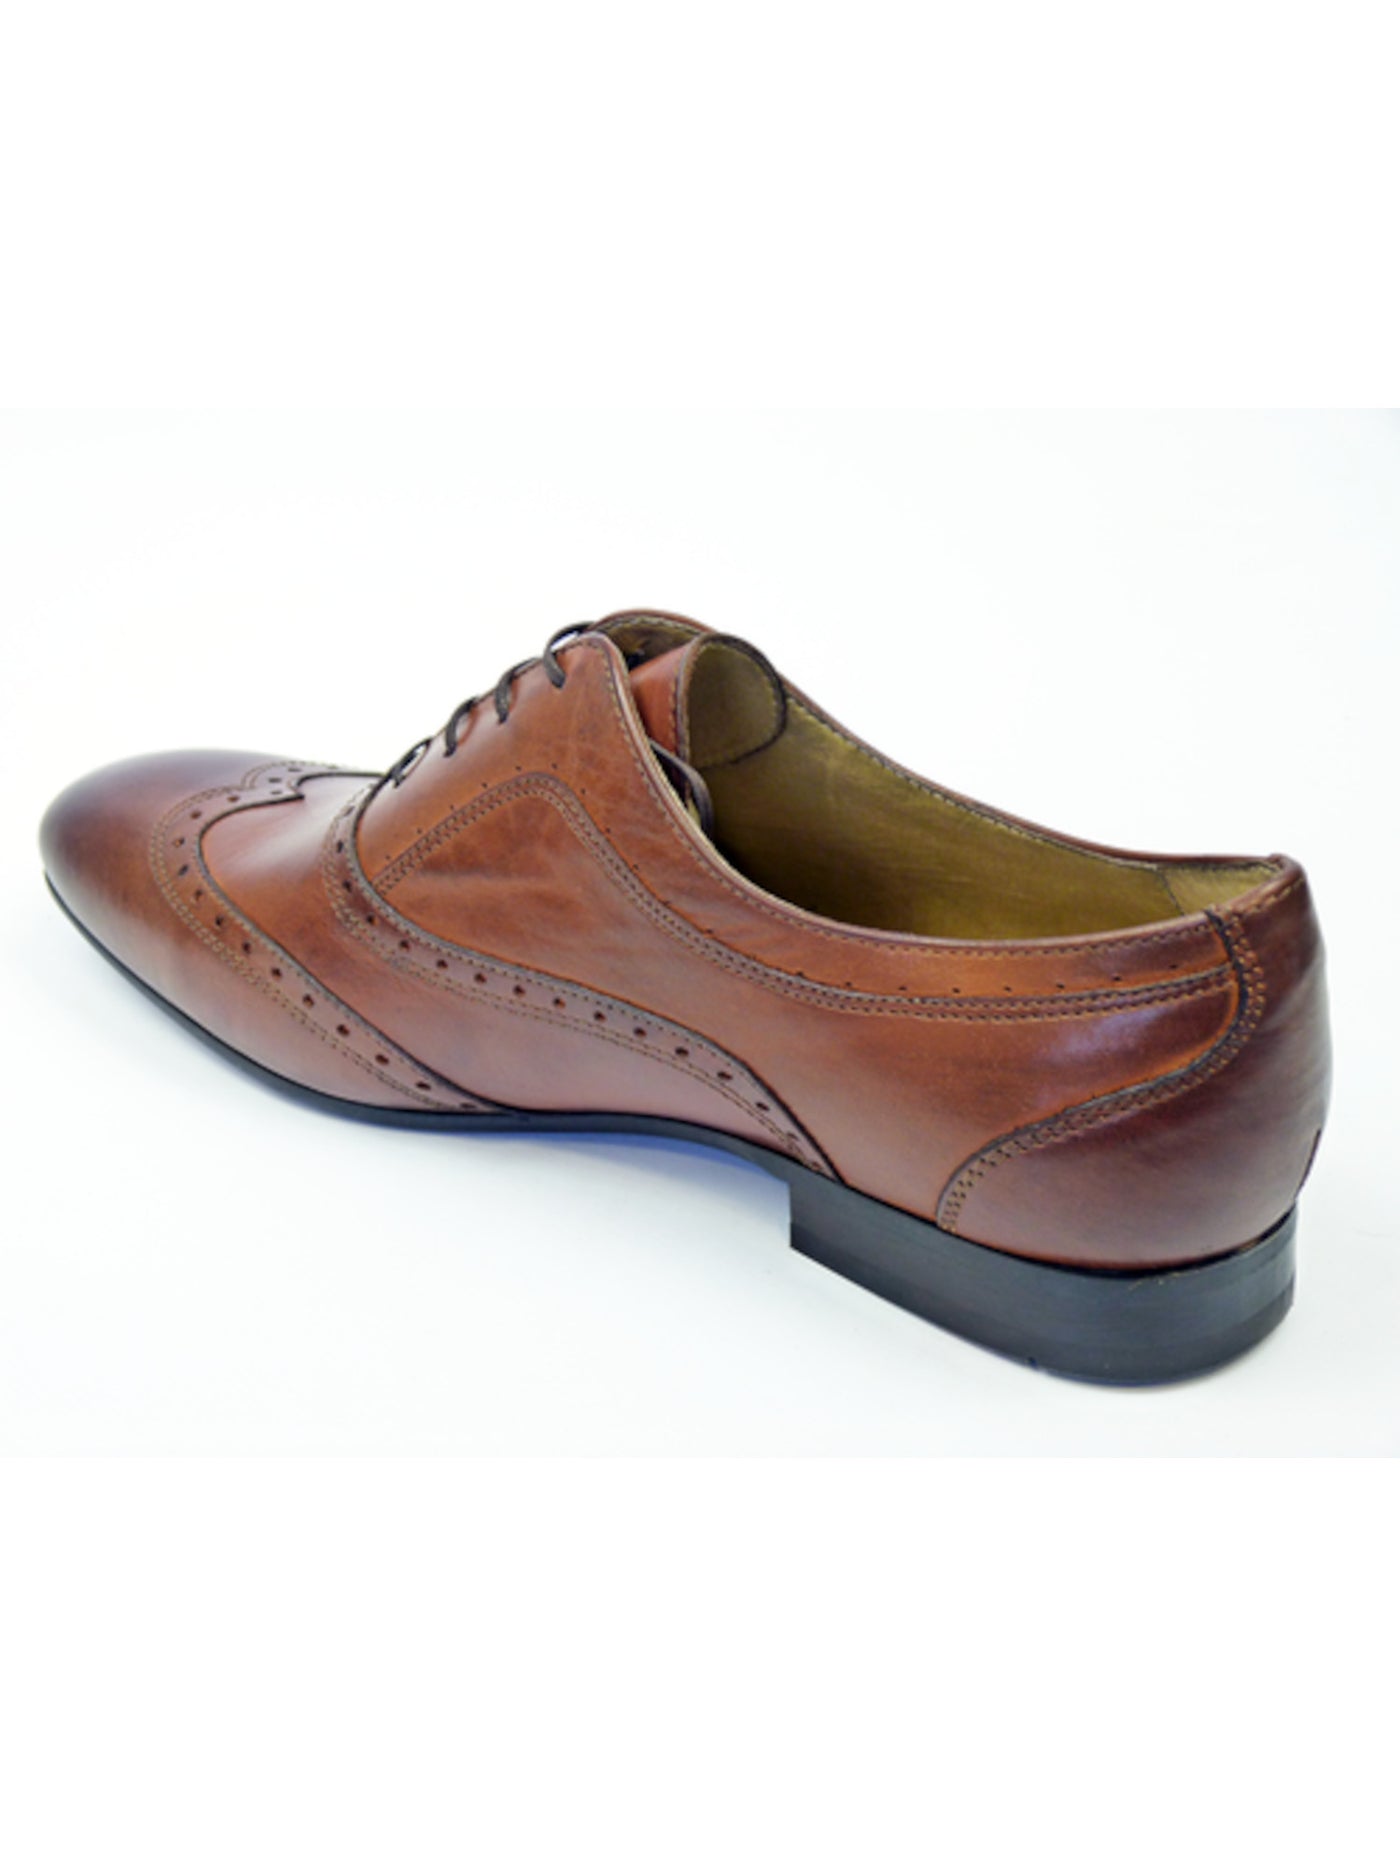 HUDSON Mens Brown Perforated Francis Wingtip Toe Block Heel Lace-Up Leather Oxford Shoes 46